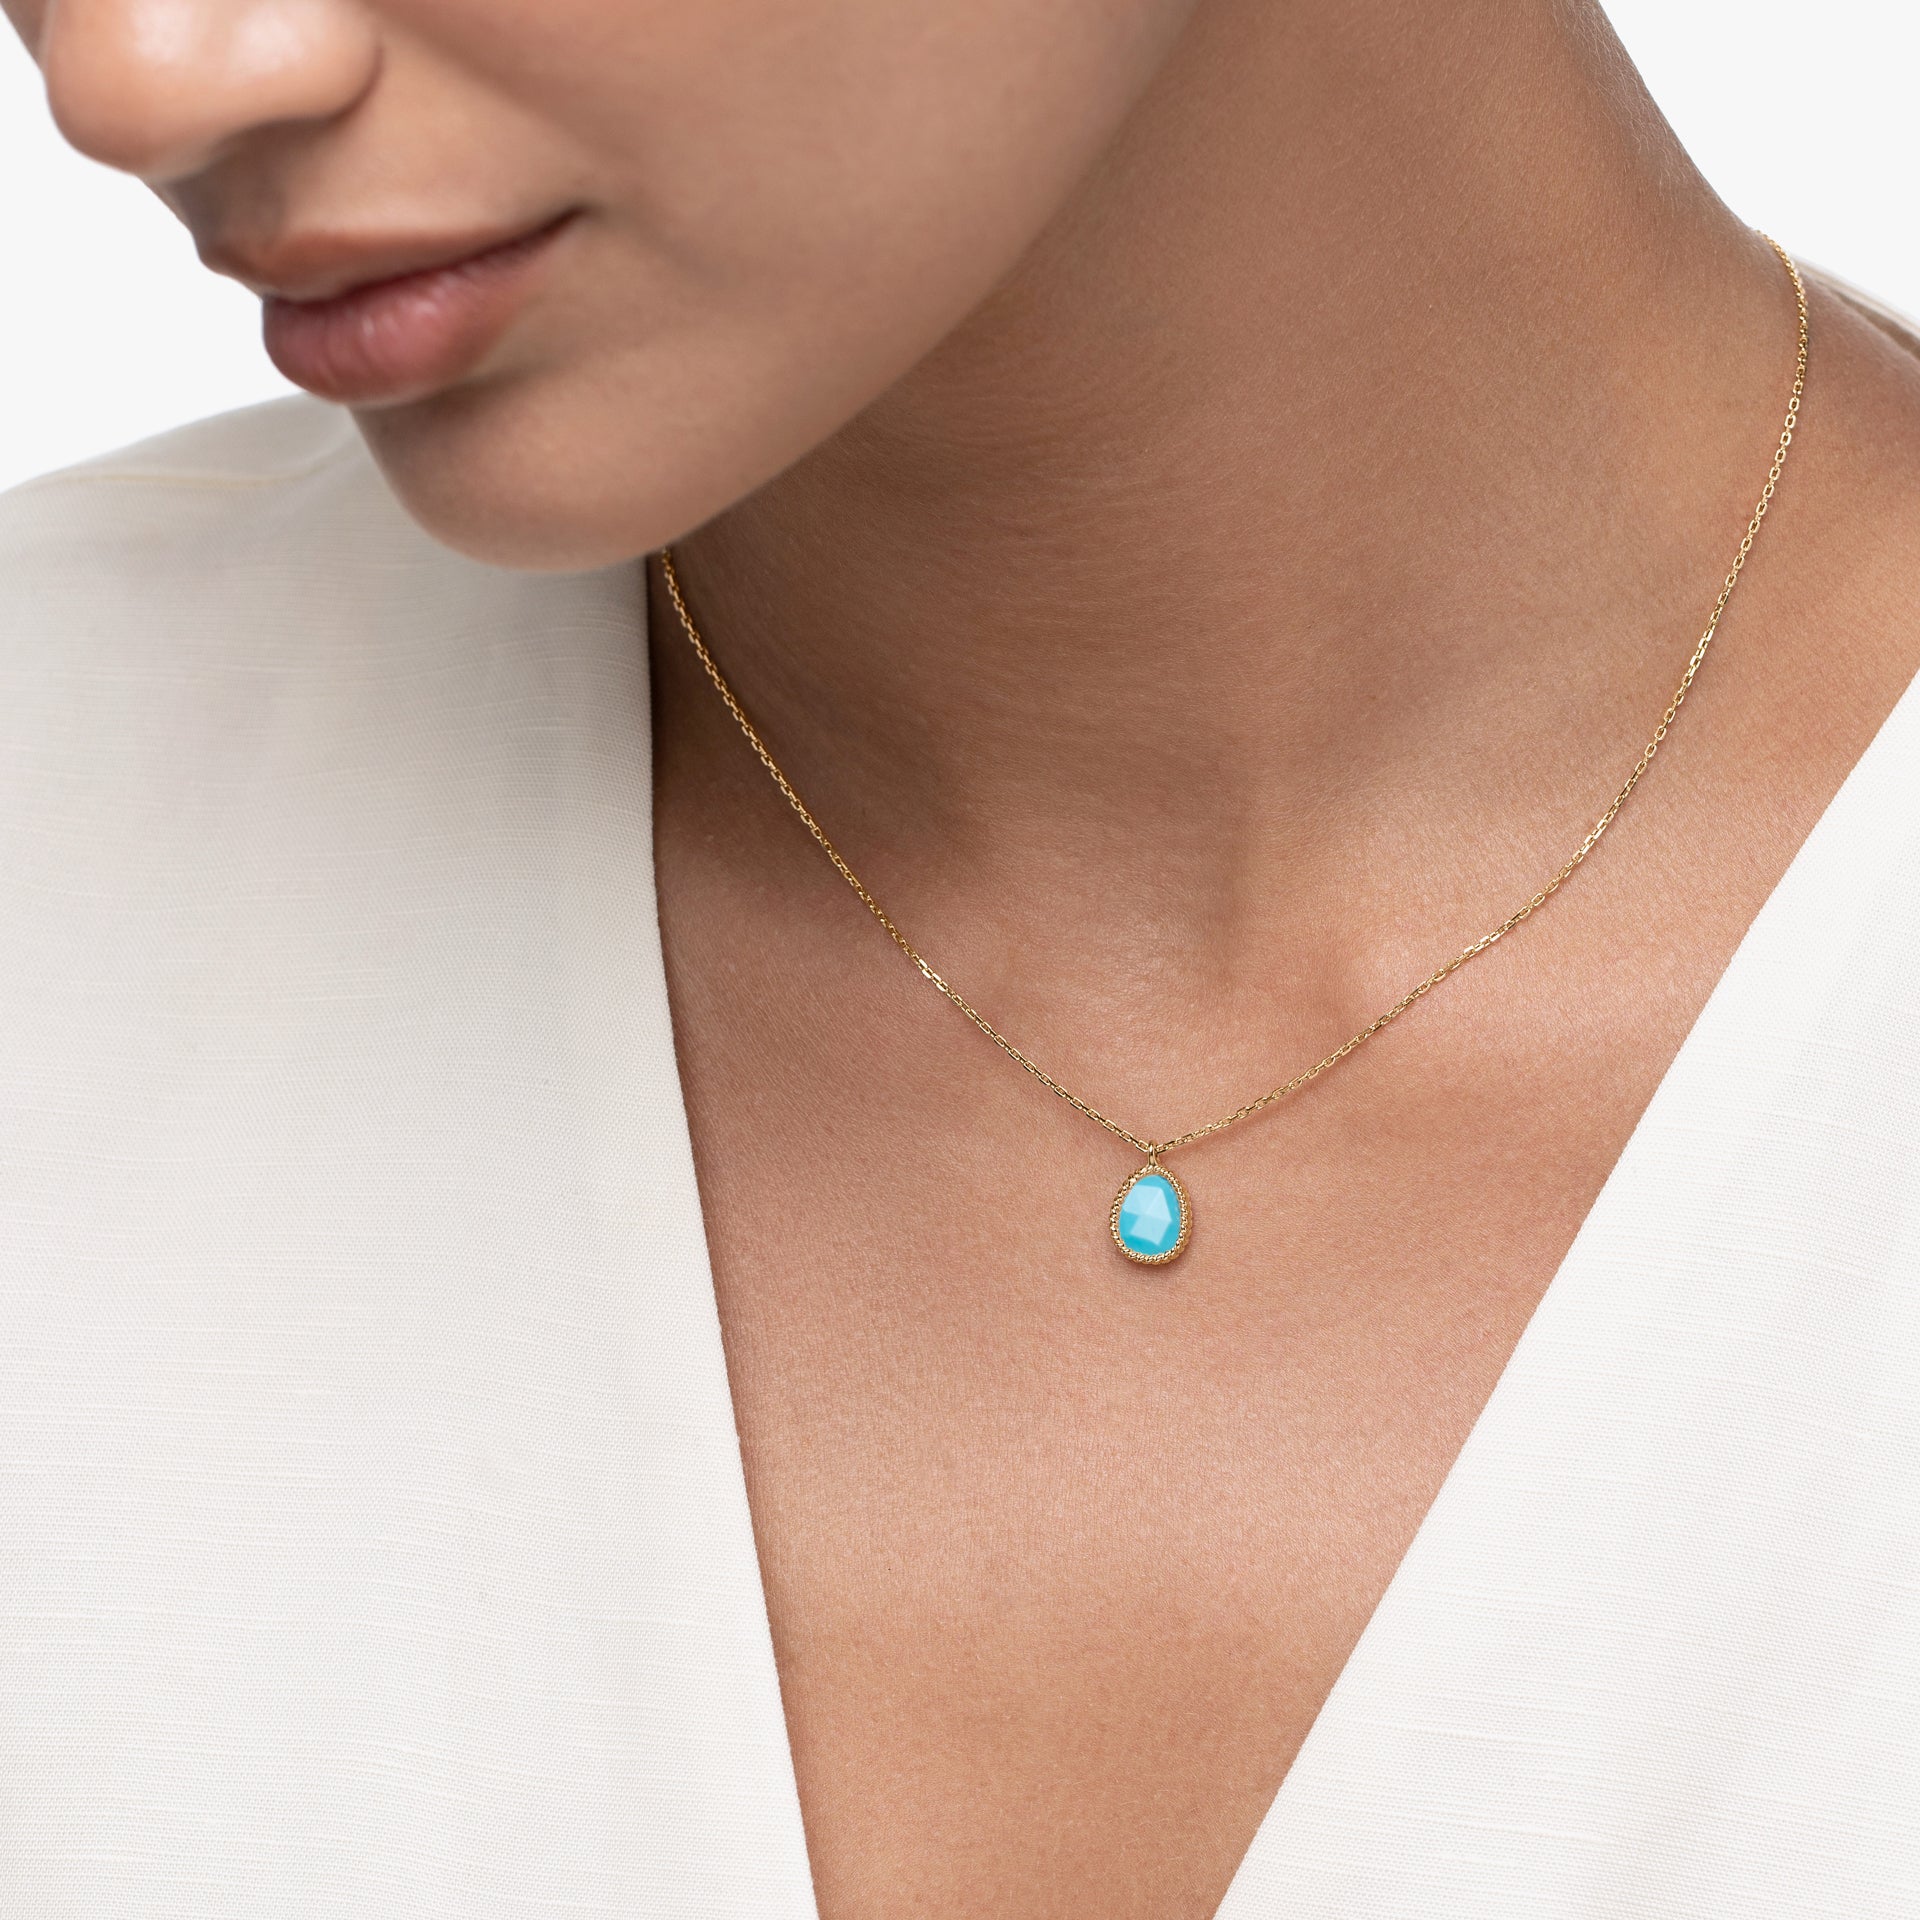 Nina Mariner Necklace In 18 Karat Yellow Gold With Petite Turquoise Stone